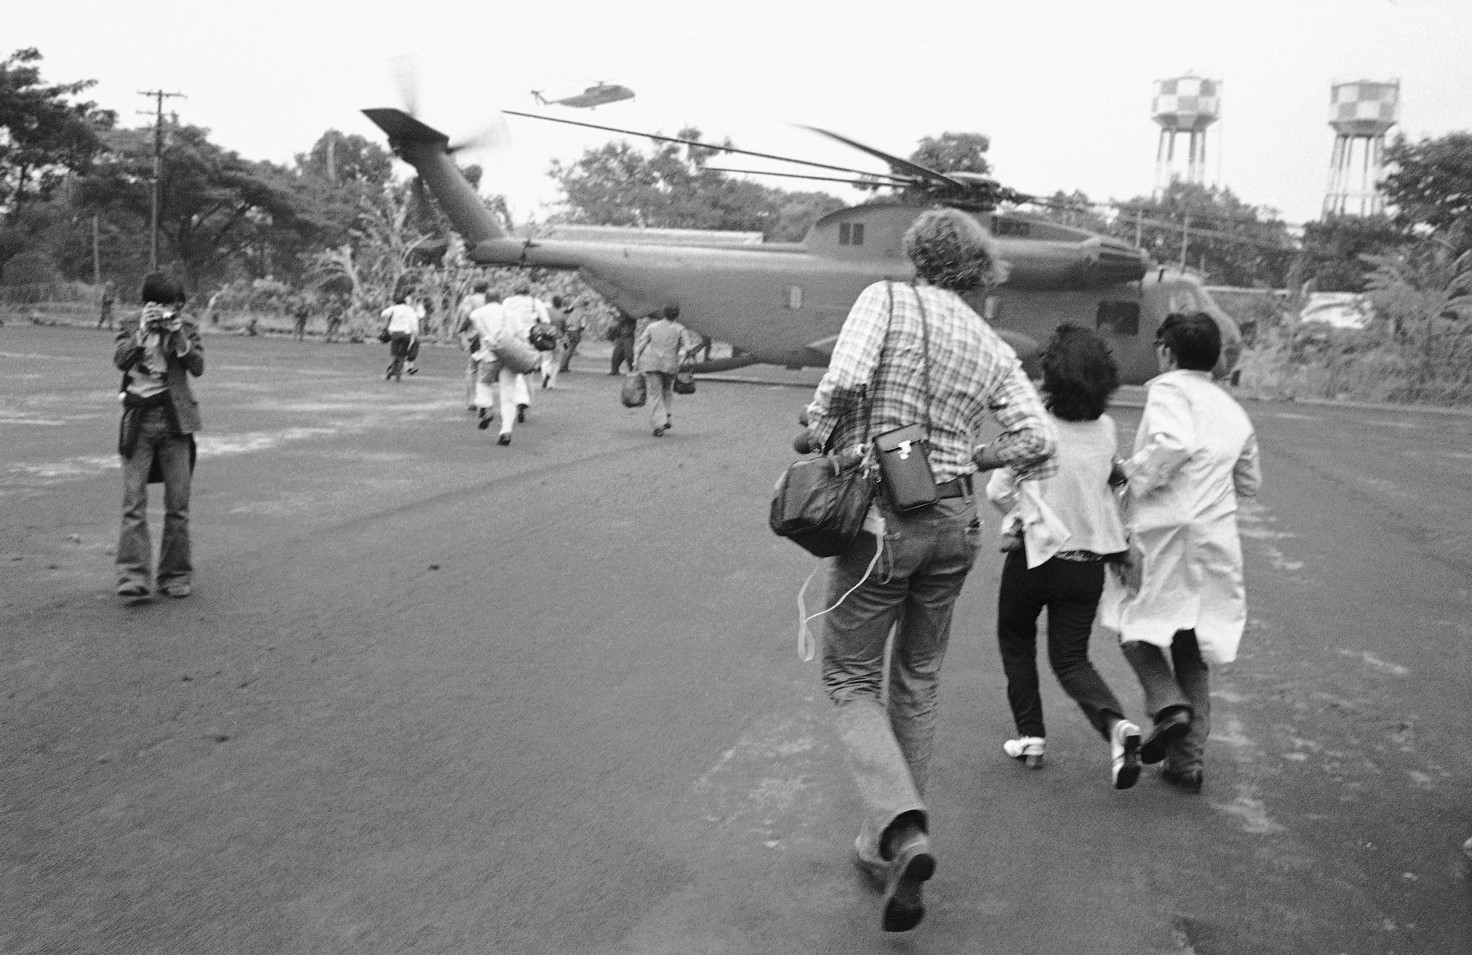 It took place on April 29 and 30, 1975, during the final stages of the Vietnam War.